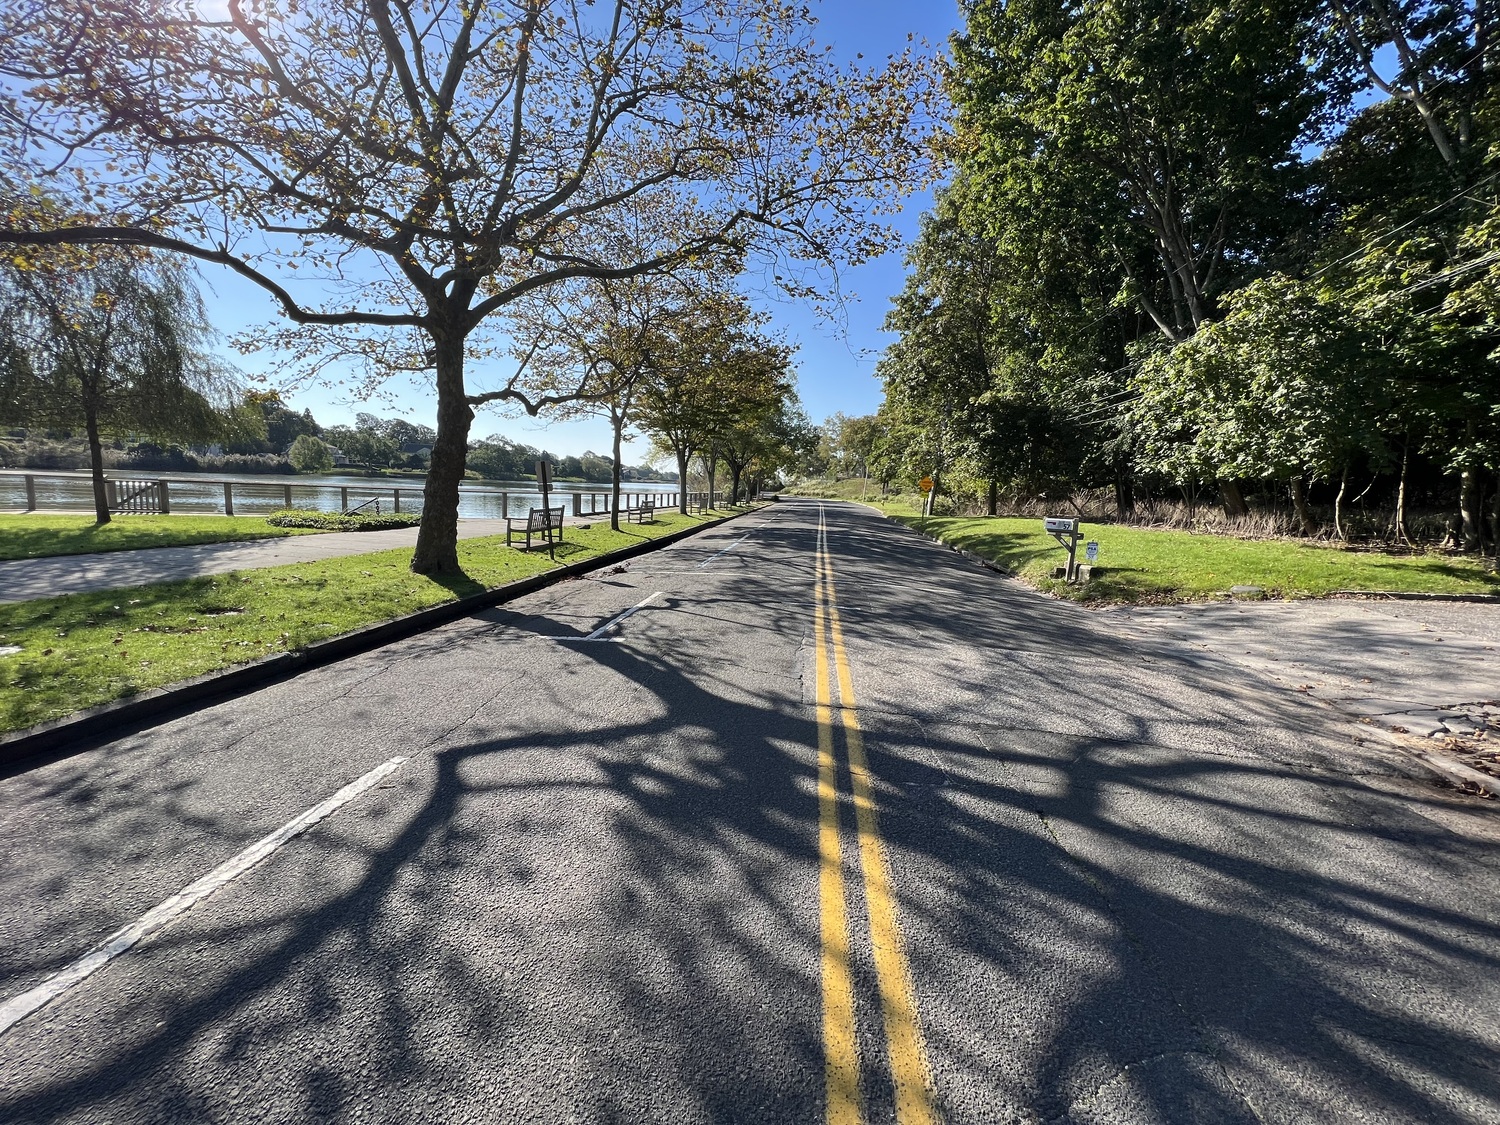 The Lake Agawam Conservancy proposes closing Pond Land to motor vehicle traffic as part of a plan to build a new public park and reduce runoff into the lake.  DANA SHAW